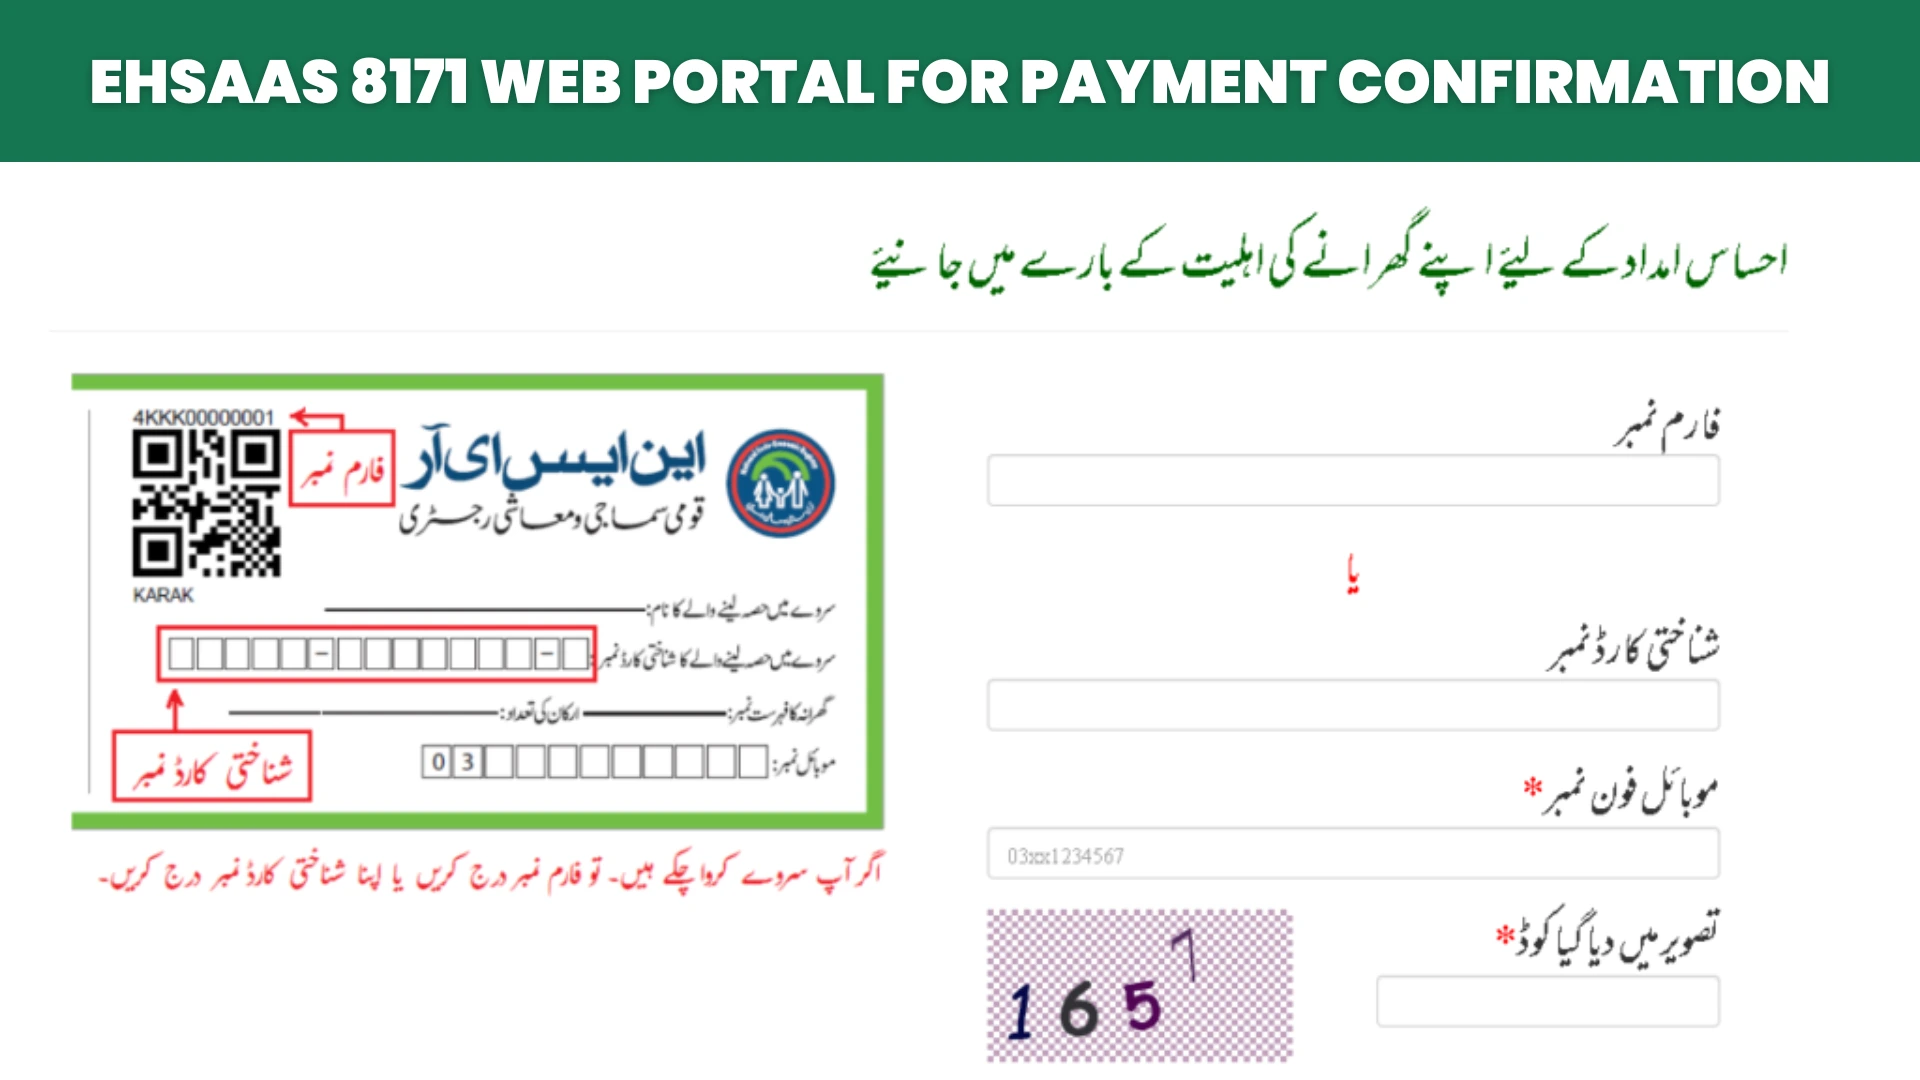 Ehsaas 8171 Web Portal for Payment Confirmation